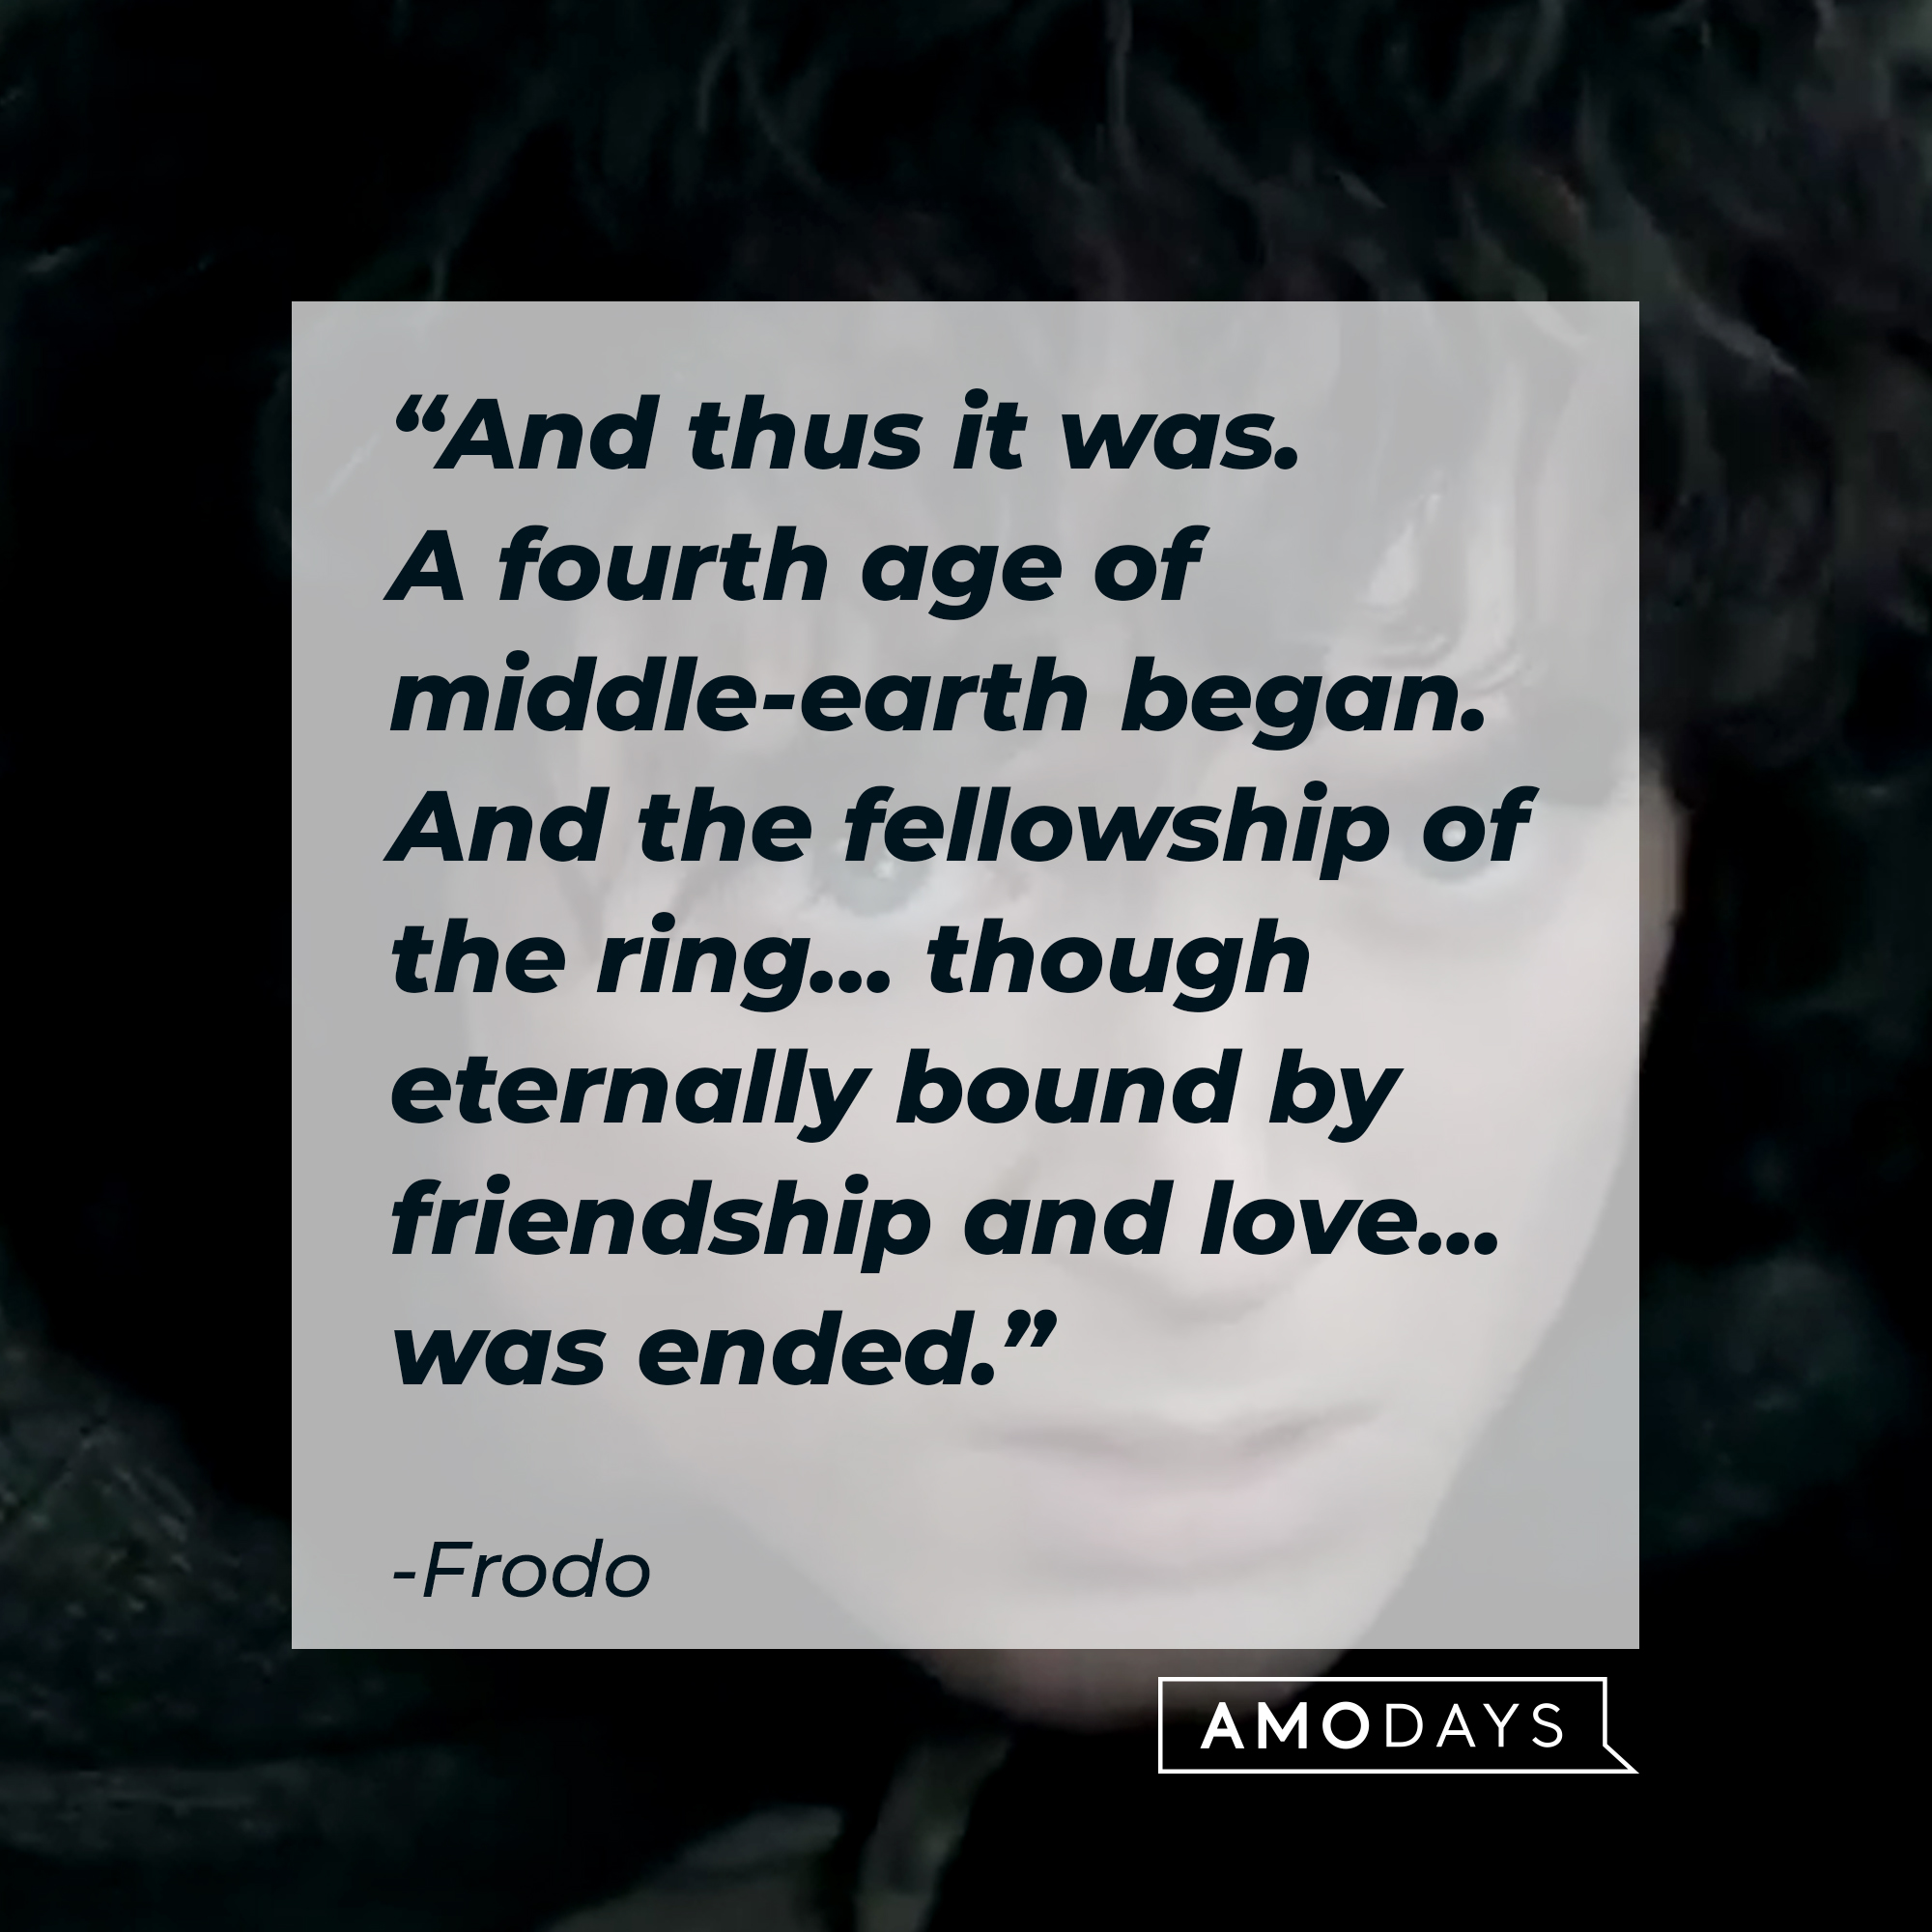 A photo of Frodo Baggins with the quote, "And thus it was. A fourth age of middle-earth began. And the fellowship of the ring... though eternally bound by friendship and love... was ended." | Source: Facebook/lordoftheringstrilogy